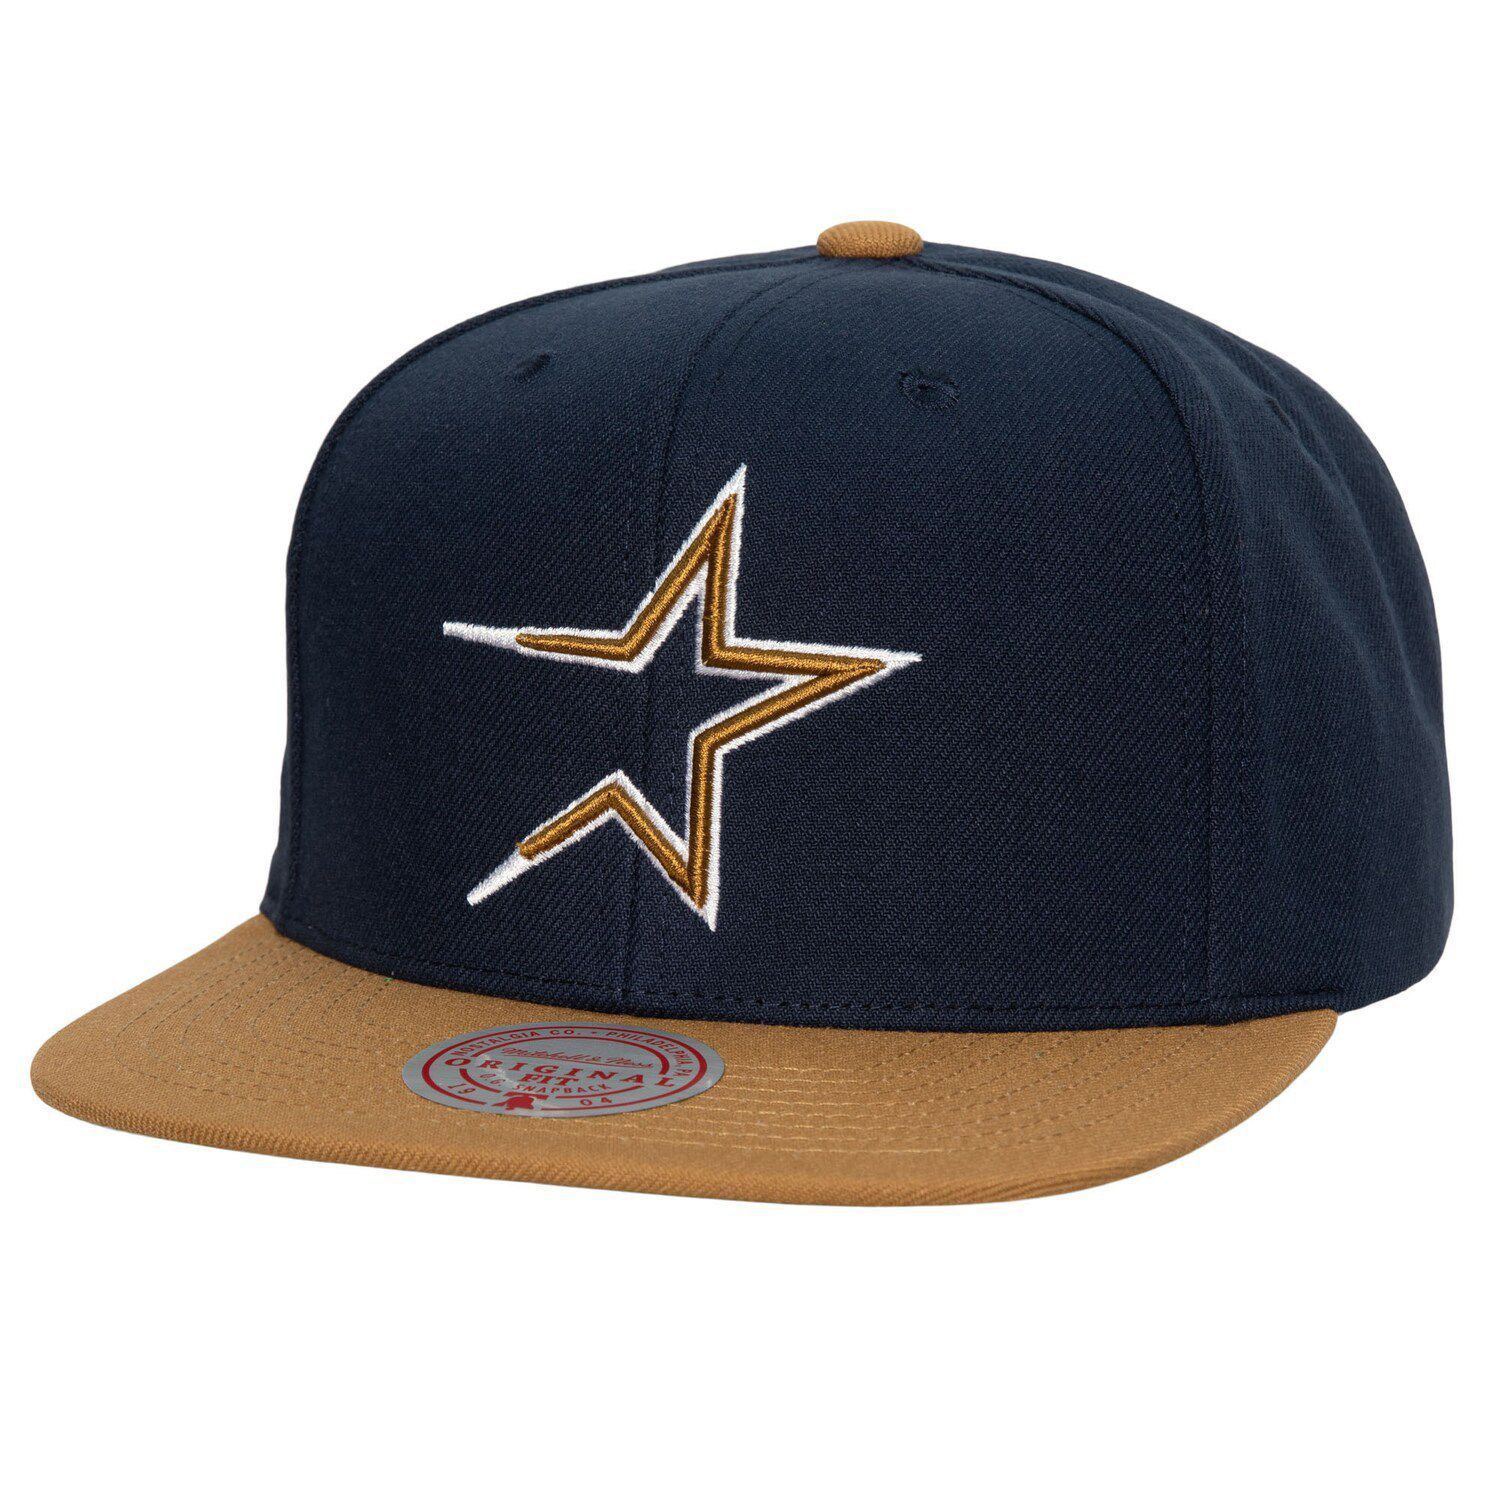 Men's '47 Navy Houston Astros Cooperstown Collection Franchise Fitted Hat Size: Small